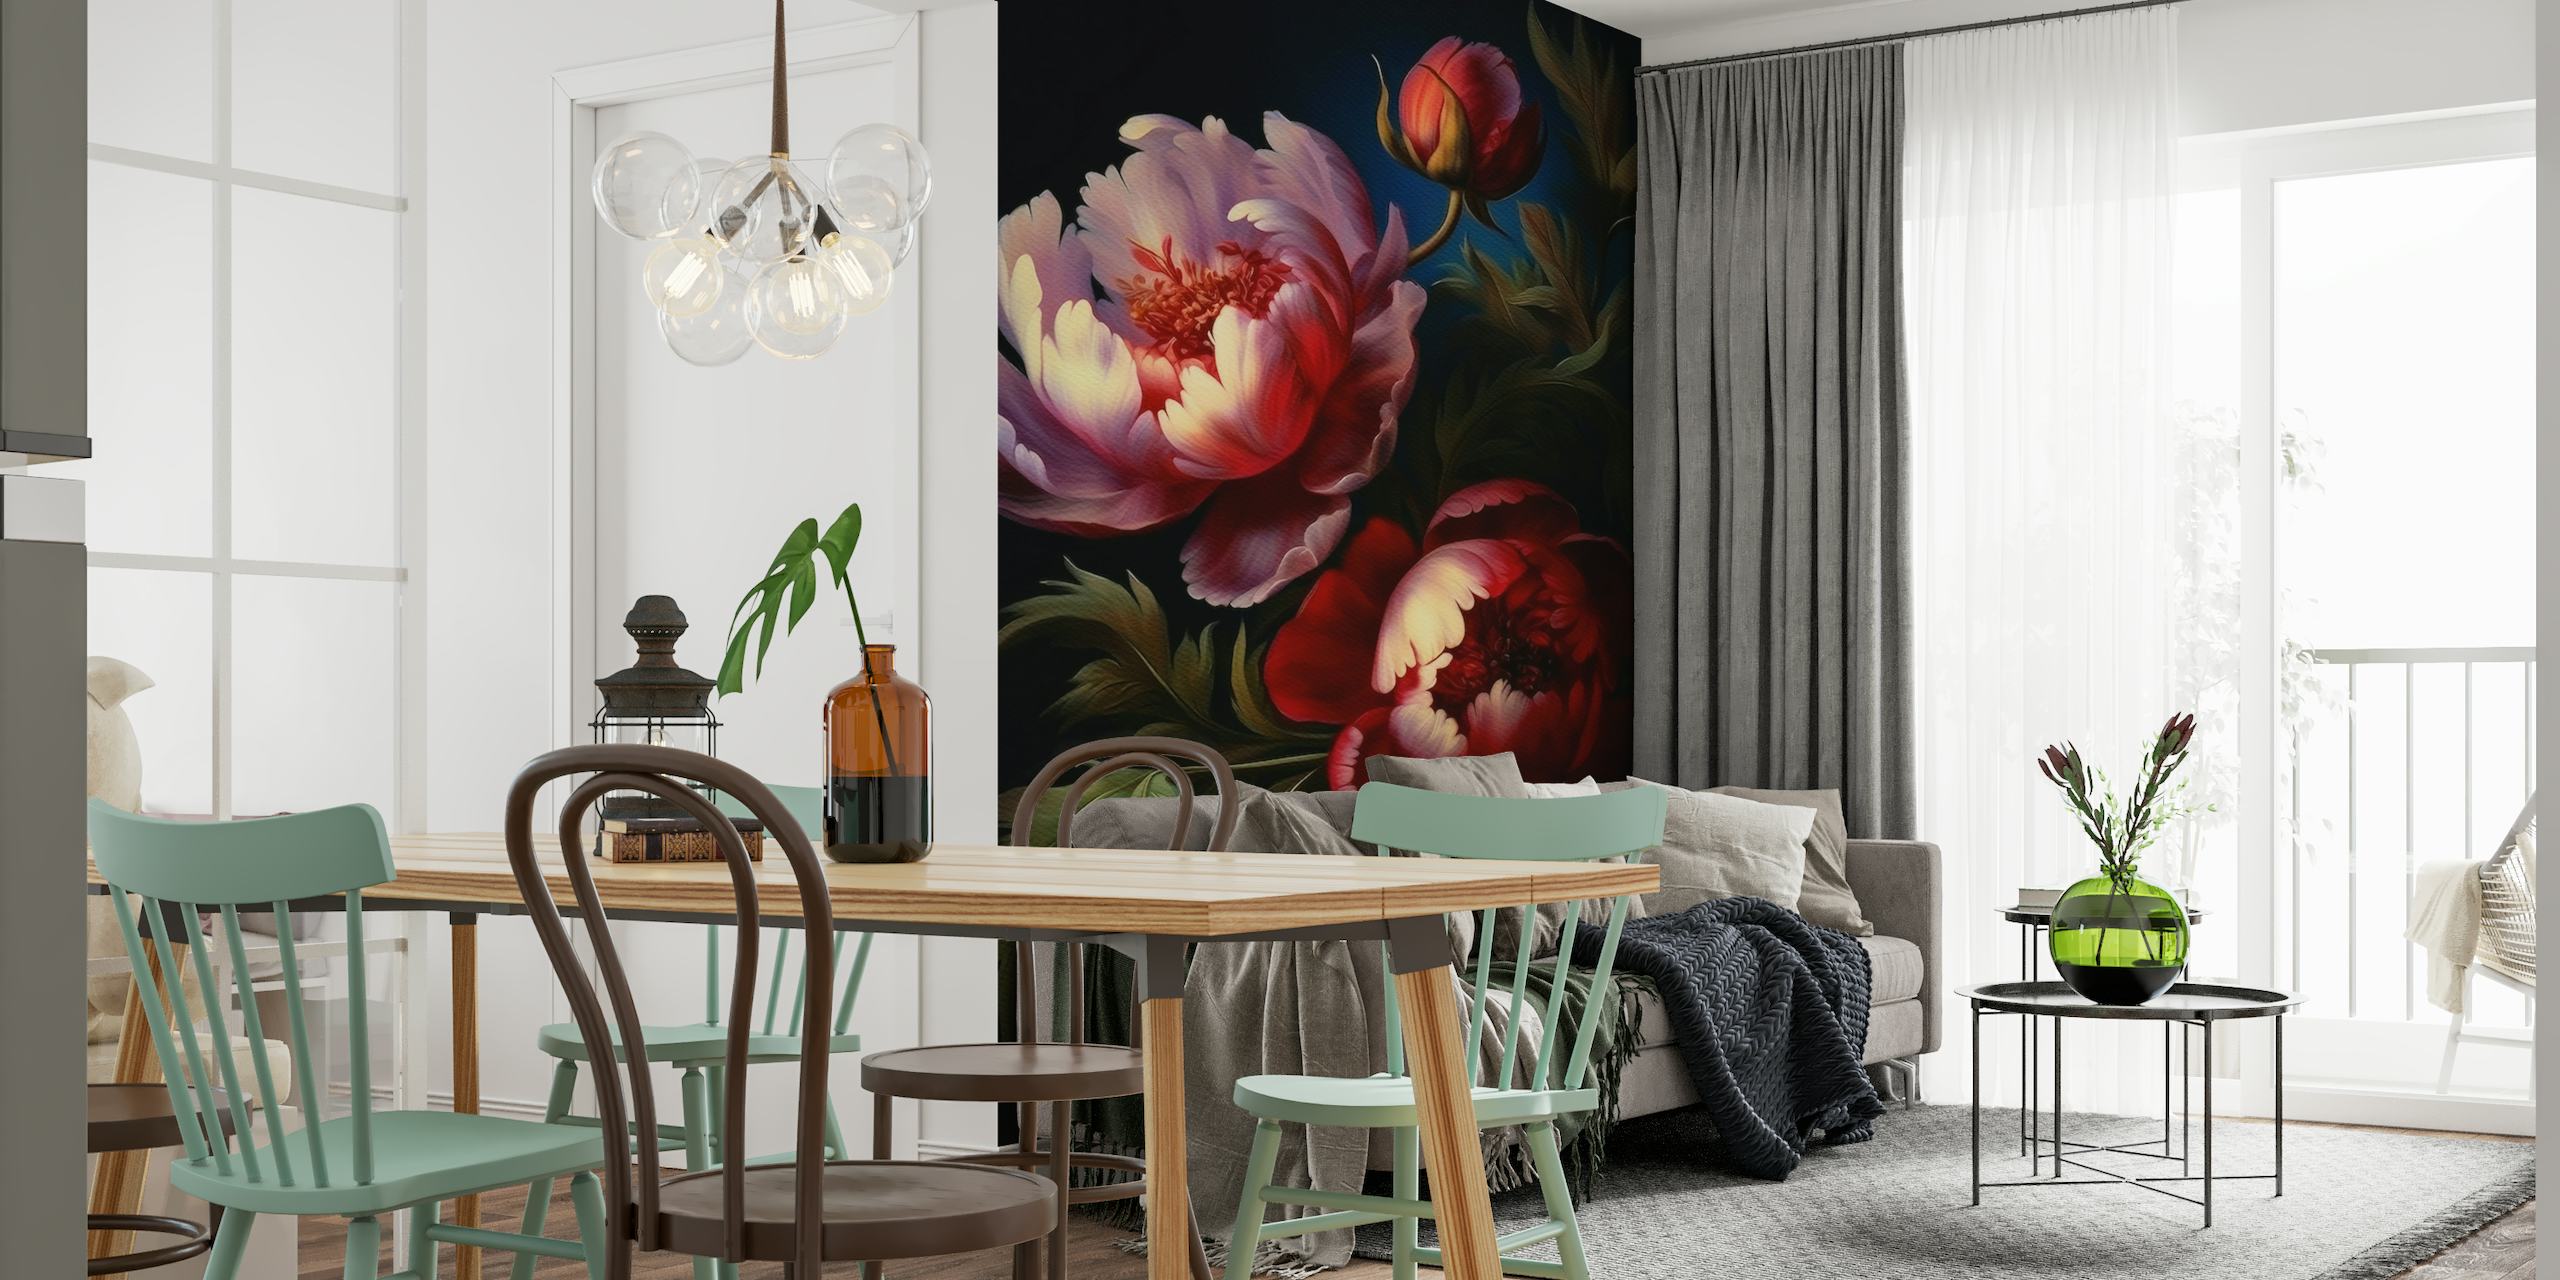 Luxurious dark-toned baroque floral garden wall mural with detailed peonies and foliage.